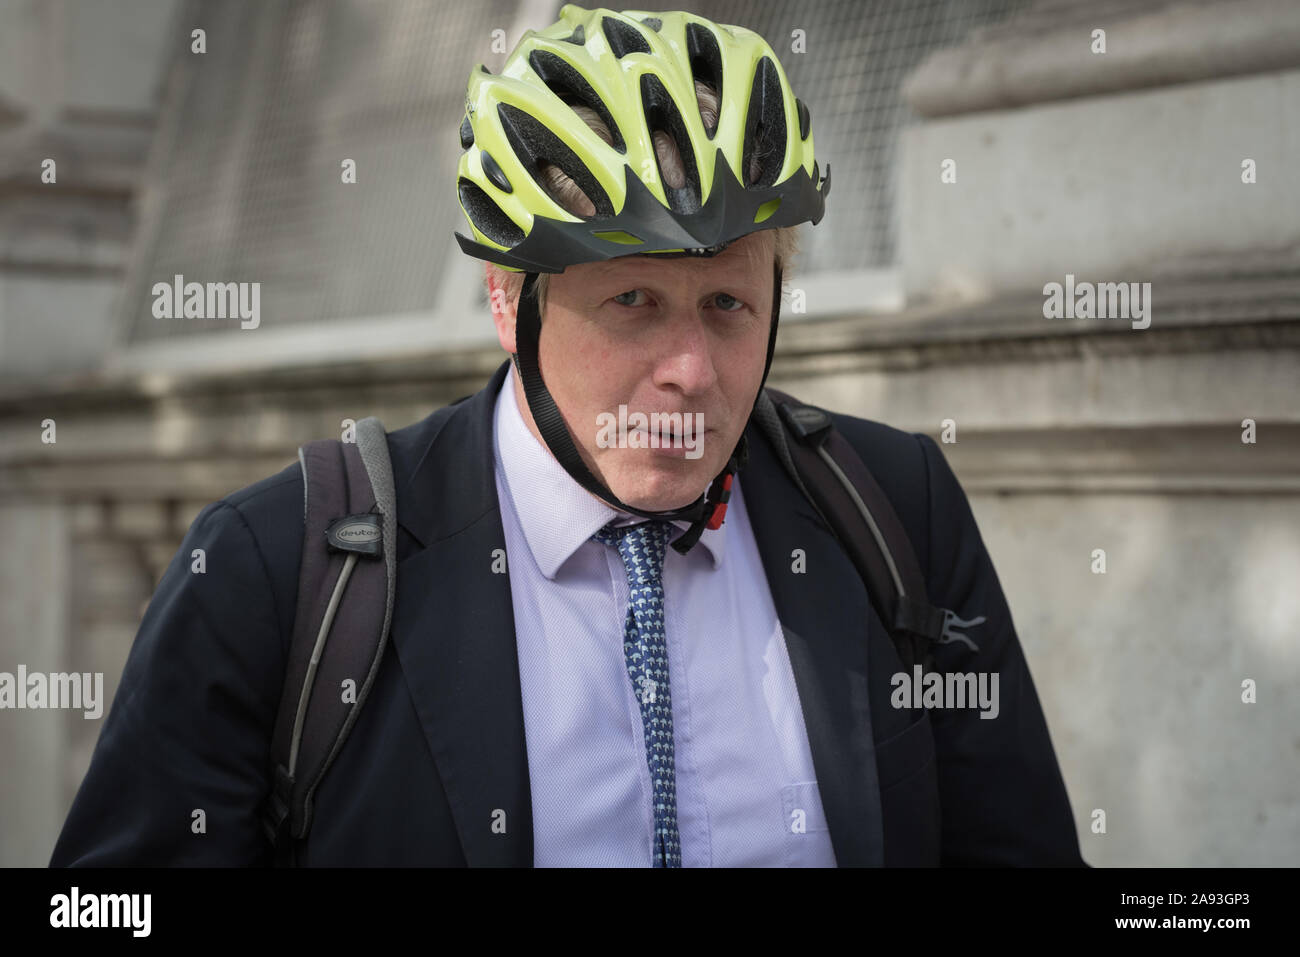 Downing Street, London, UK. 16th June 2015. Government ministers arrive at Downing Street for their weekly Cabinet meeting. Pictured: Boris Johnson. Stock Photo